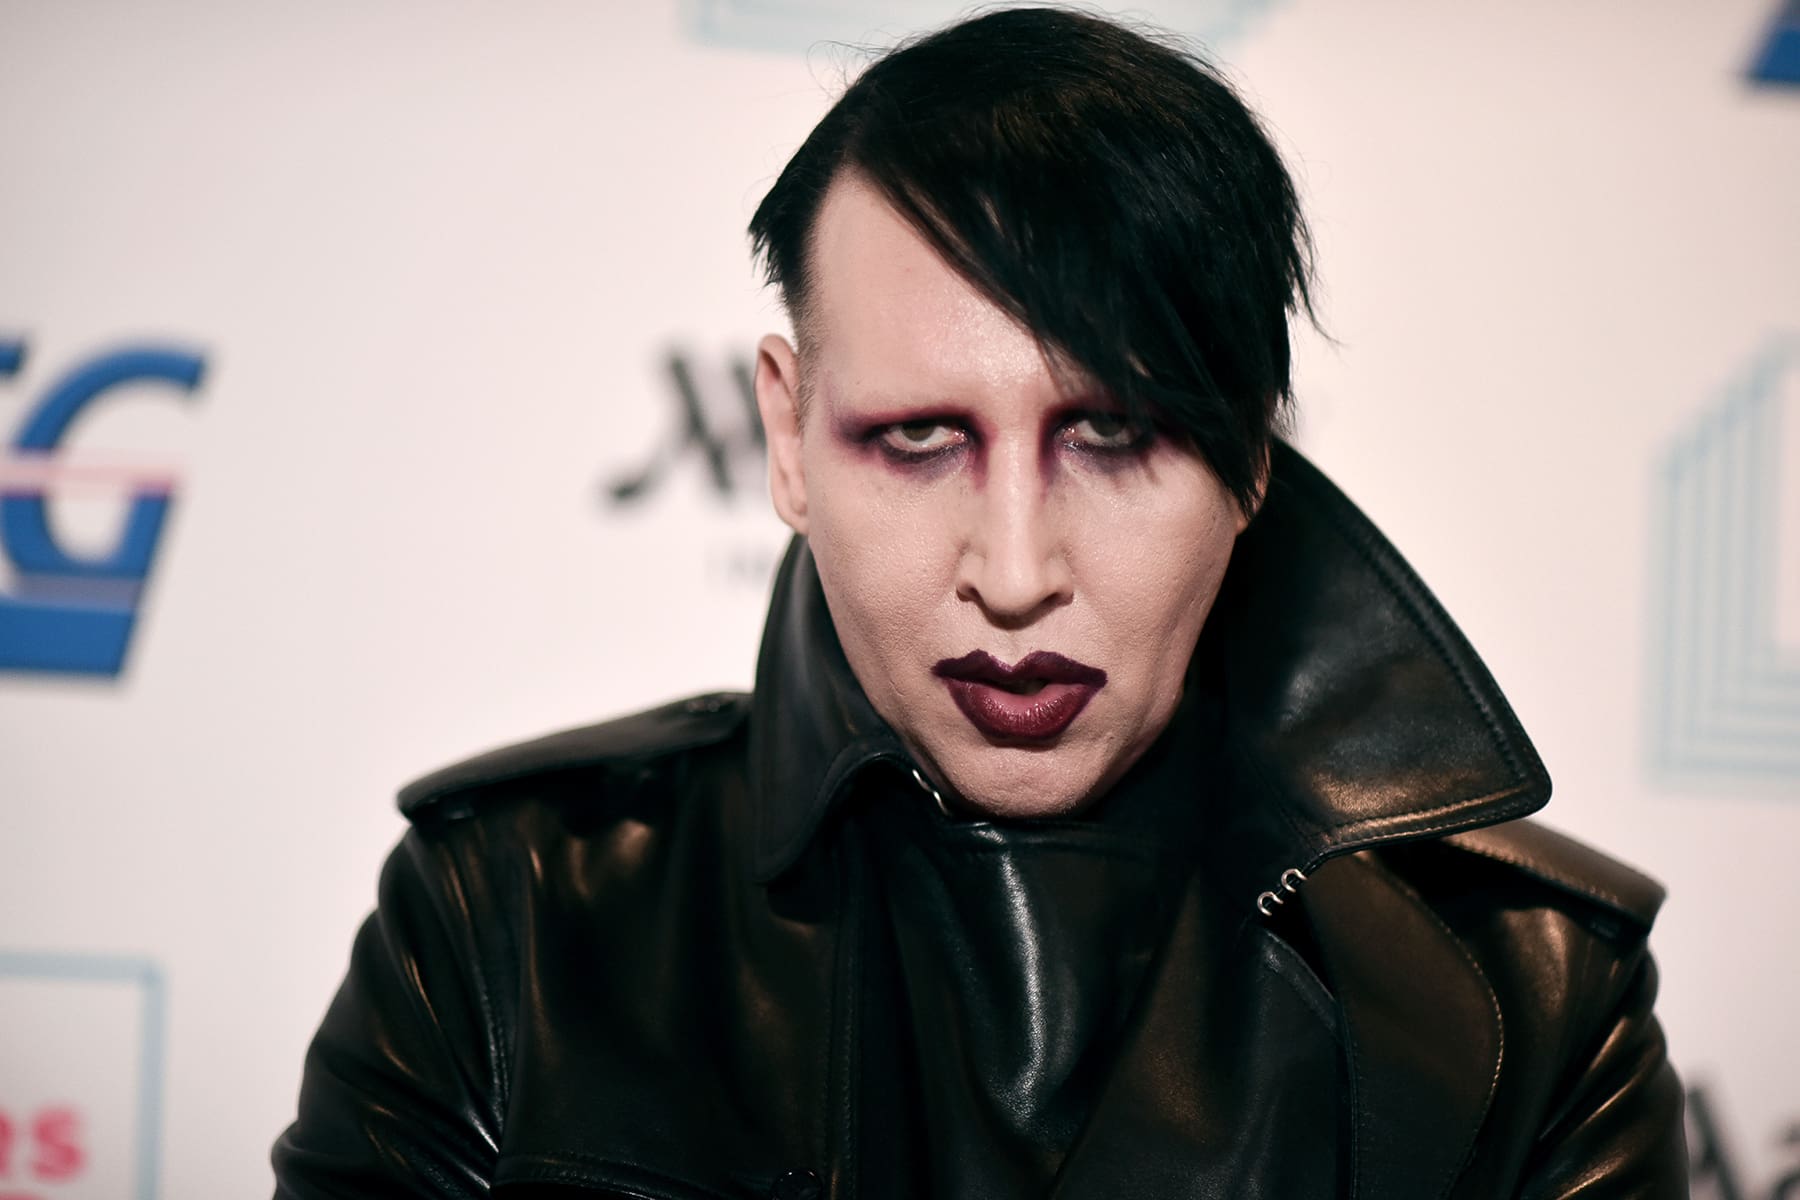 ”marilyn-manson-out-on-bail-after-turning-himself-in-to-the-police-over-gross-spitting-incident-involving-a-camerawoman”